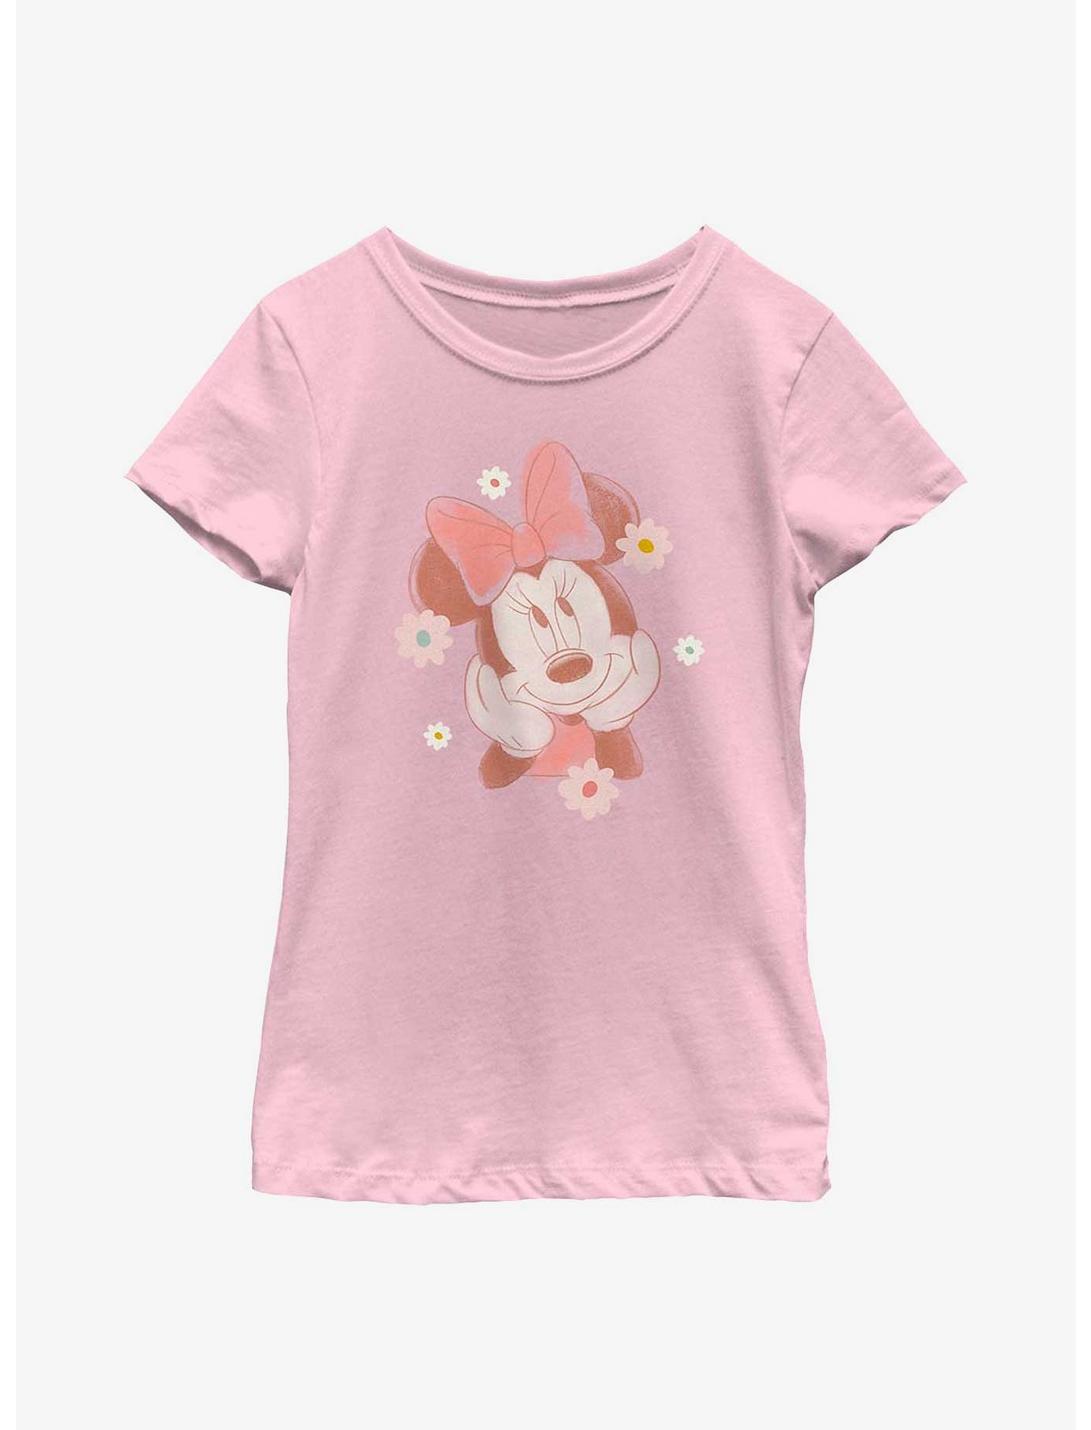 Disney Minnie Mouse Floral Frame Youth Girls T-Shirt, PINK, hi-res